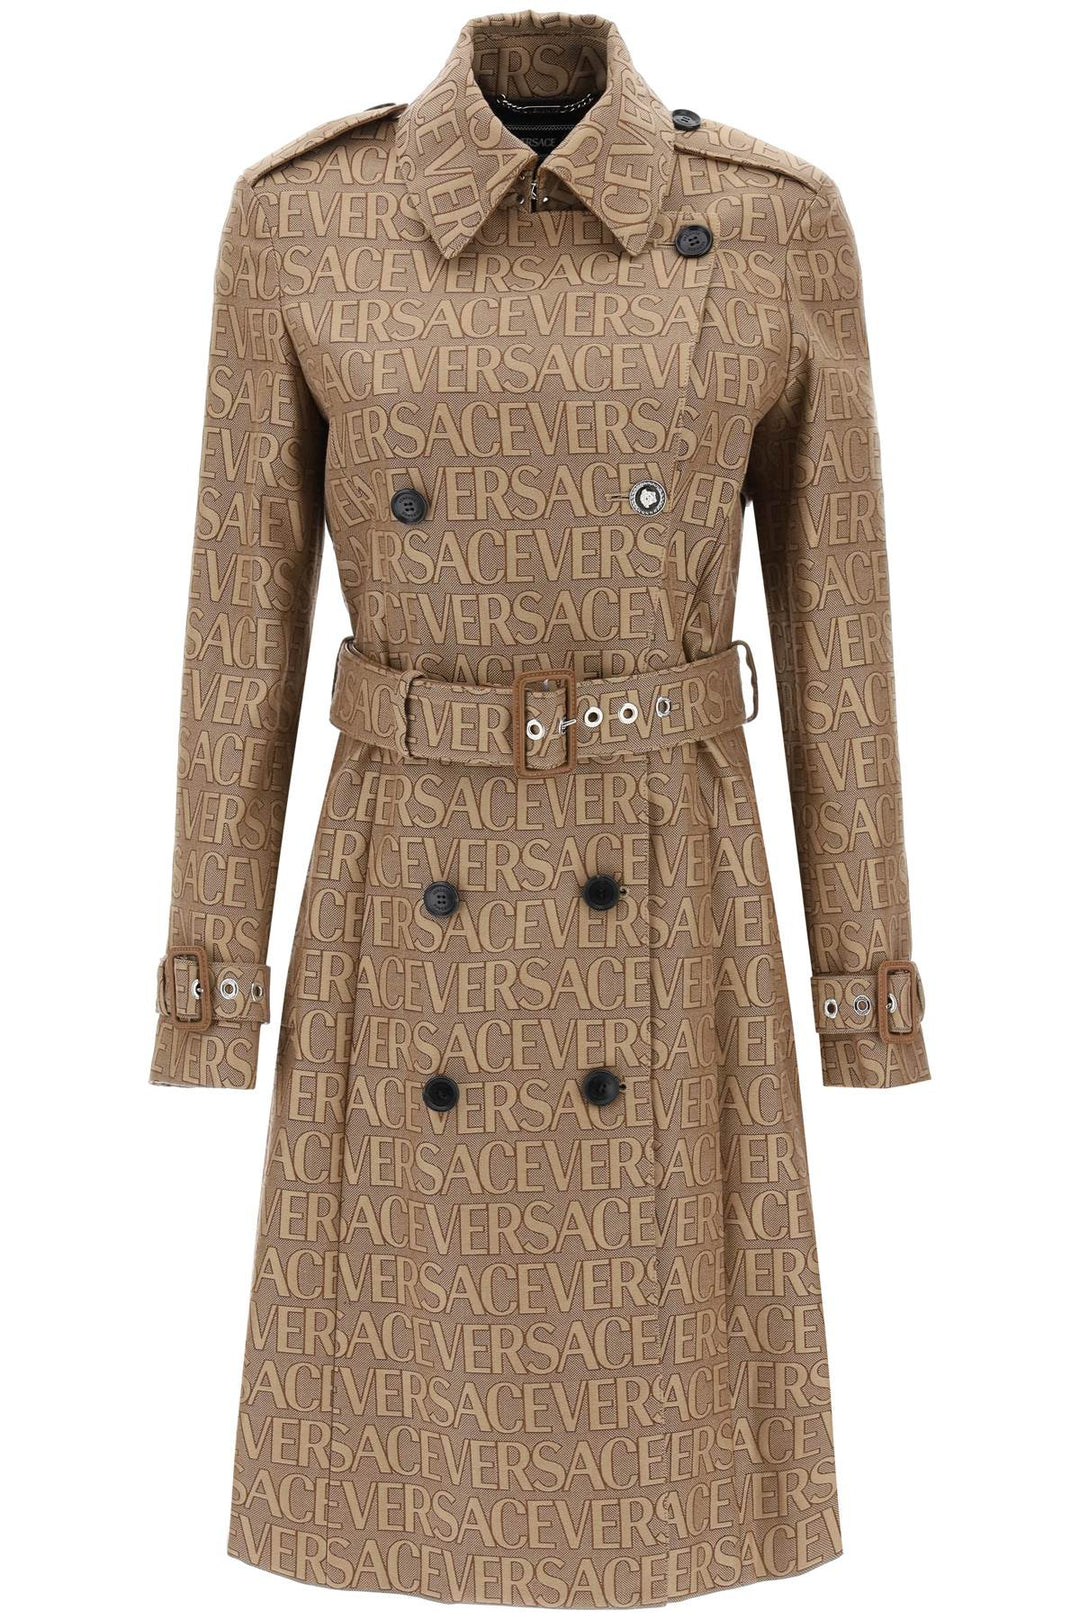 Versace 'Allover' Double Breasted Trench Coat   Beige